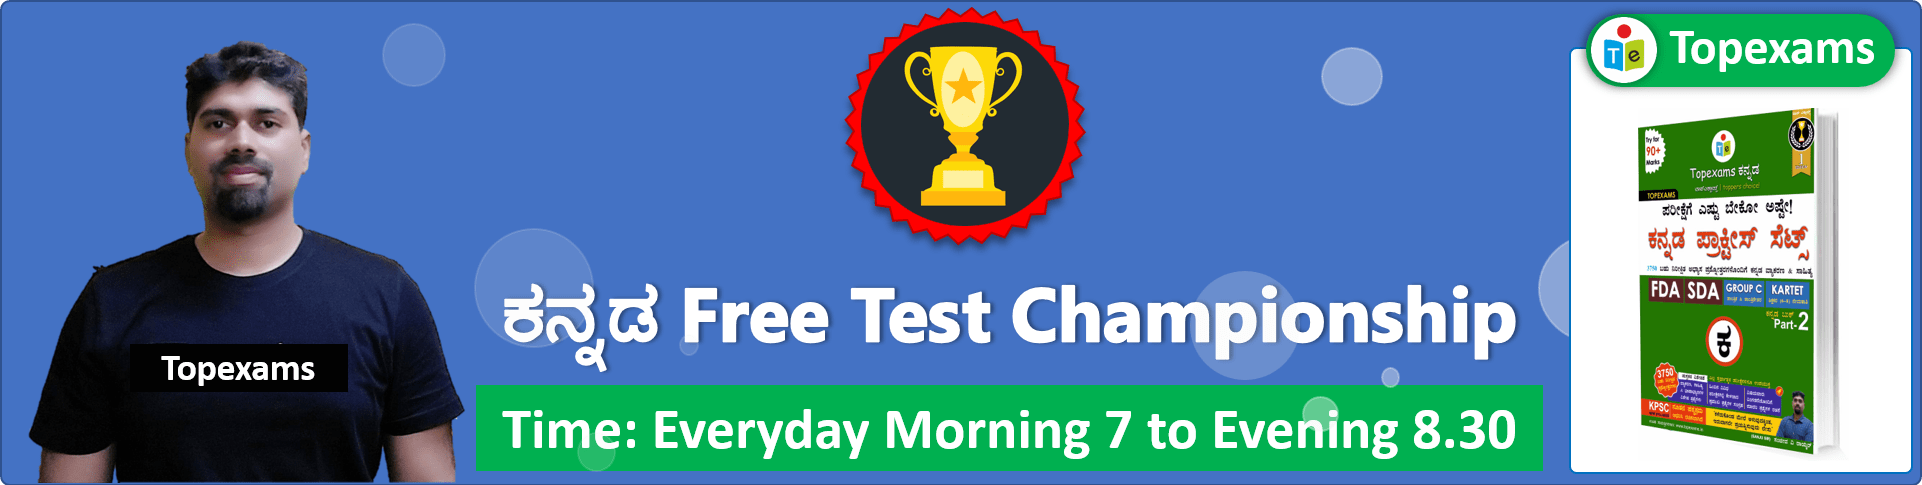 You are currently viewing Test-12 ಕನ್ನಡ Championship  For SDA, FDA, Group C, KARTET